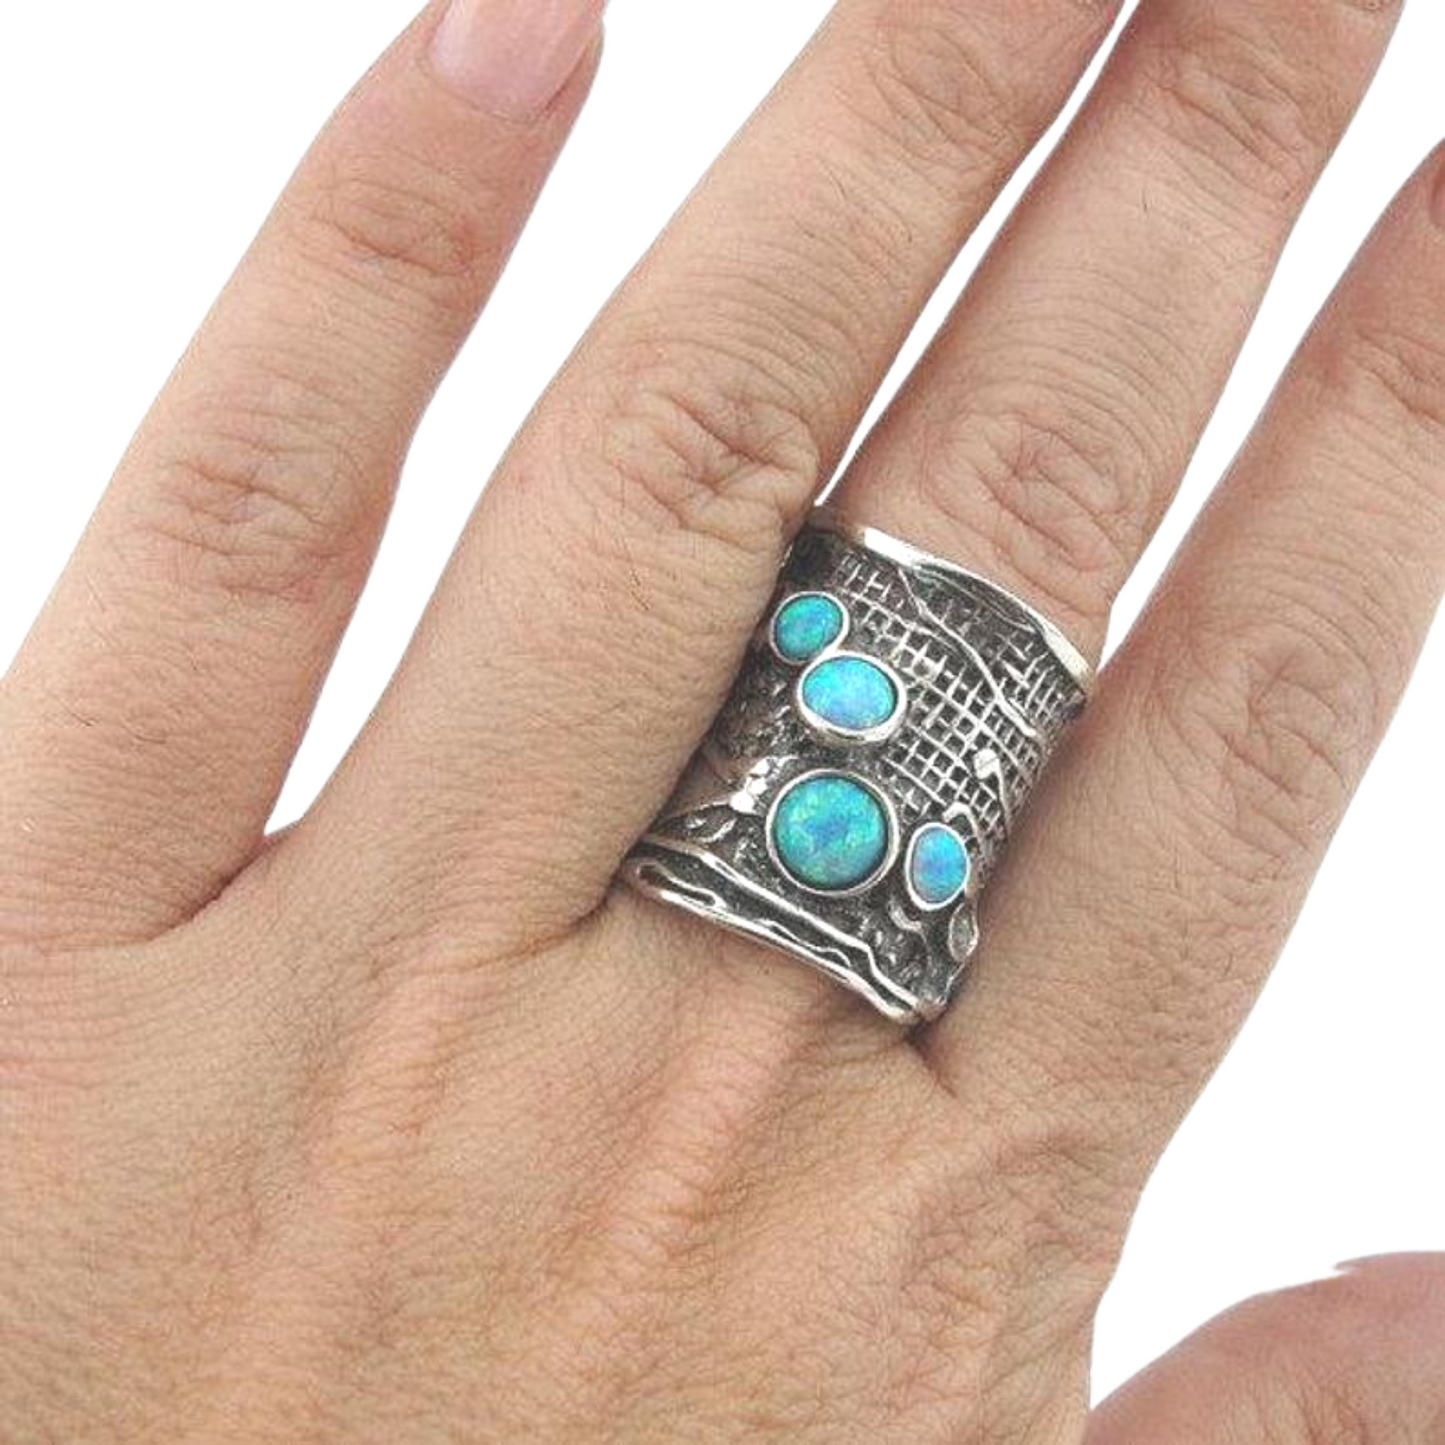 Sterling silver "net" texture, wide ring, blue mosaic opal